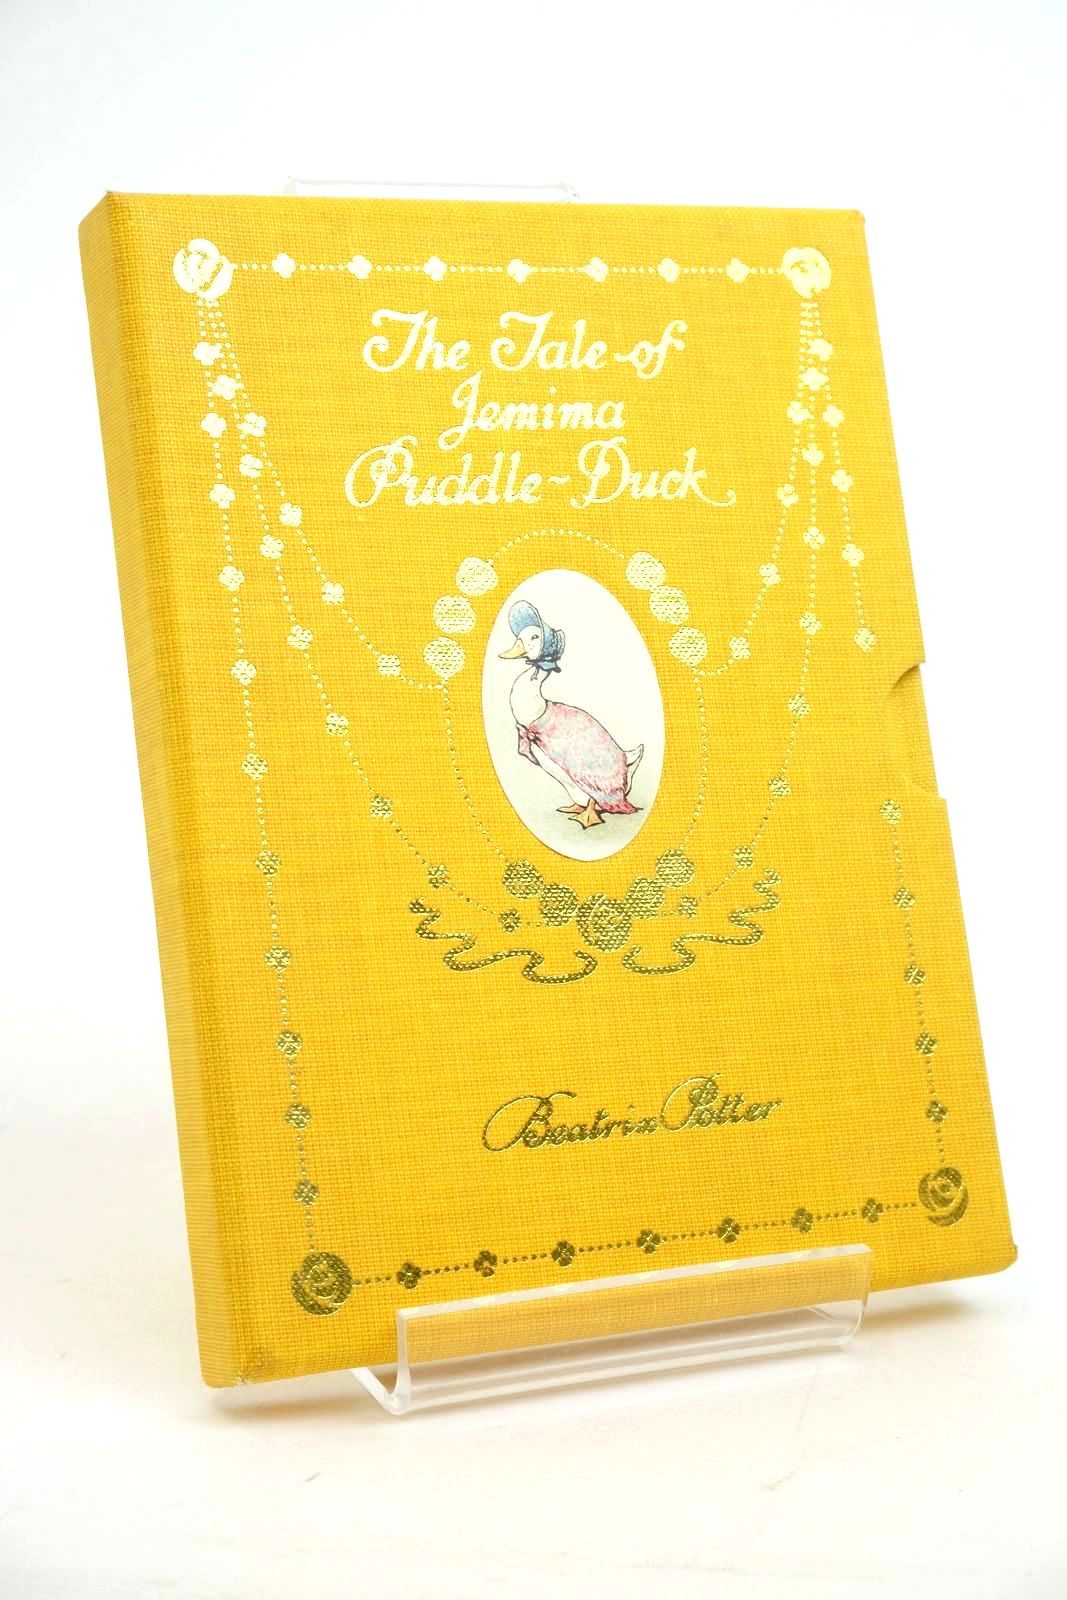 Photo of THE TALE OF JEMIMA PUDDLE-DUCK written by Potter, Beatrix illustrated by Potter, Beatrix published by Frederick Warne (STOCK CODE: 1322404)  for sale by Stella & Rose's Books